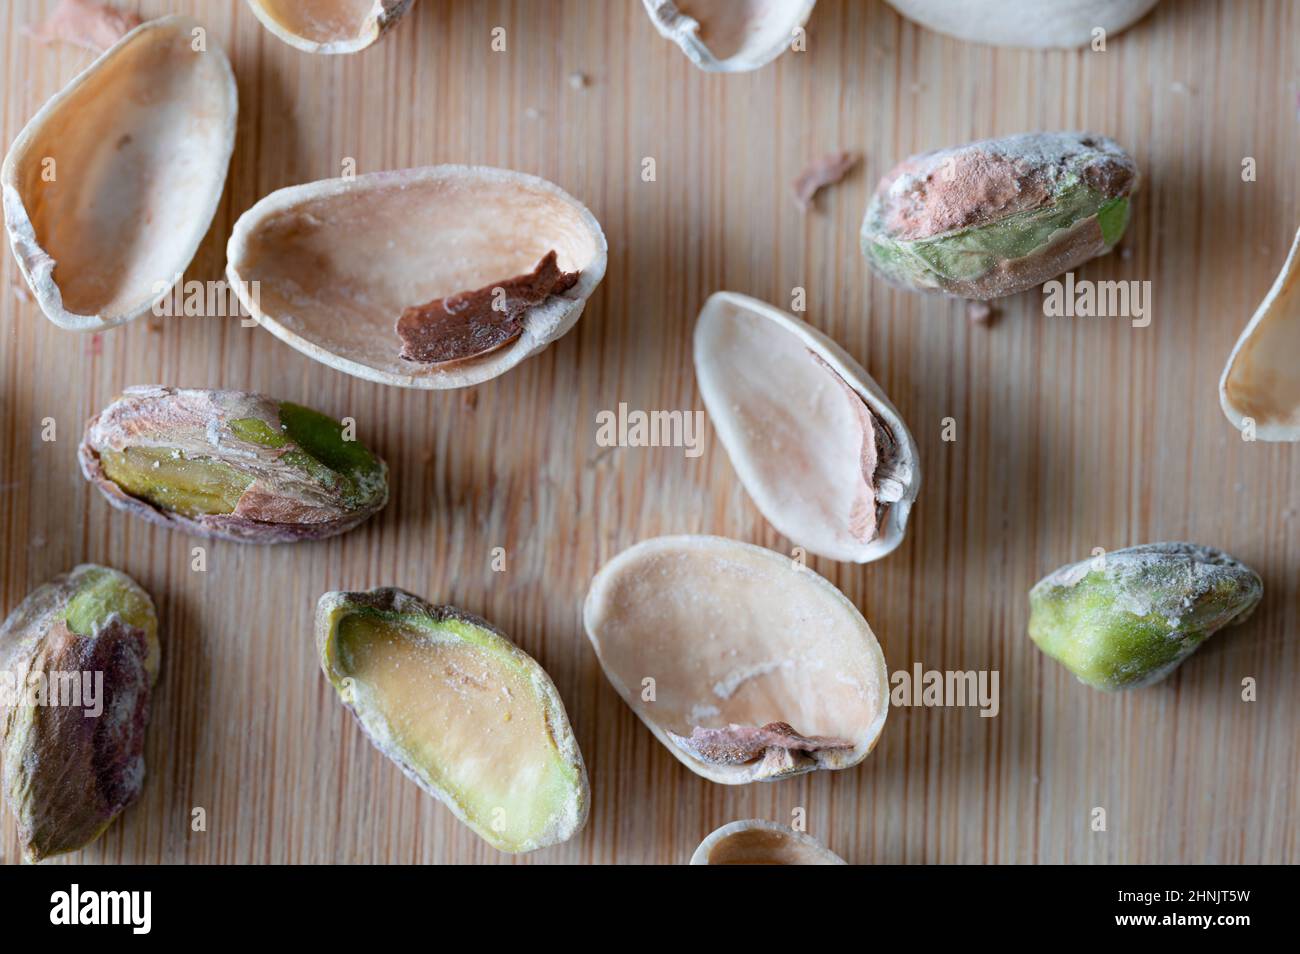 Pistachio nuts and shells on wood background Stock Photo